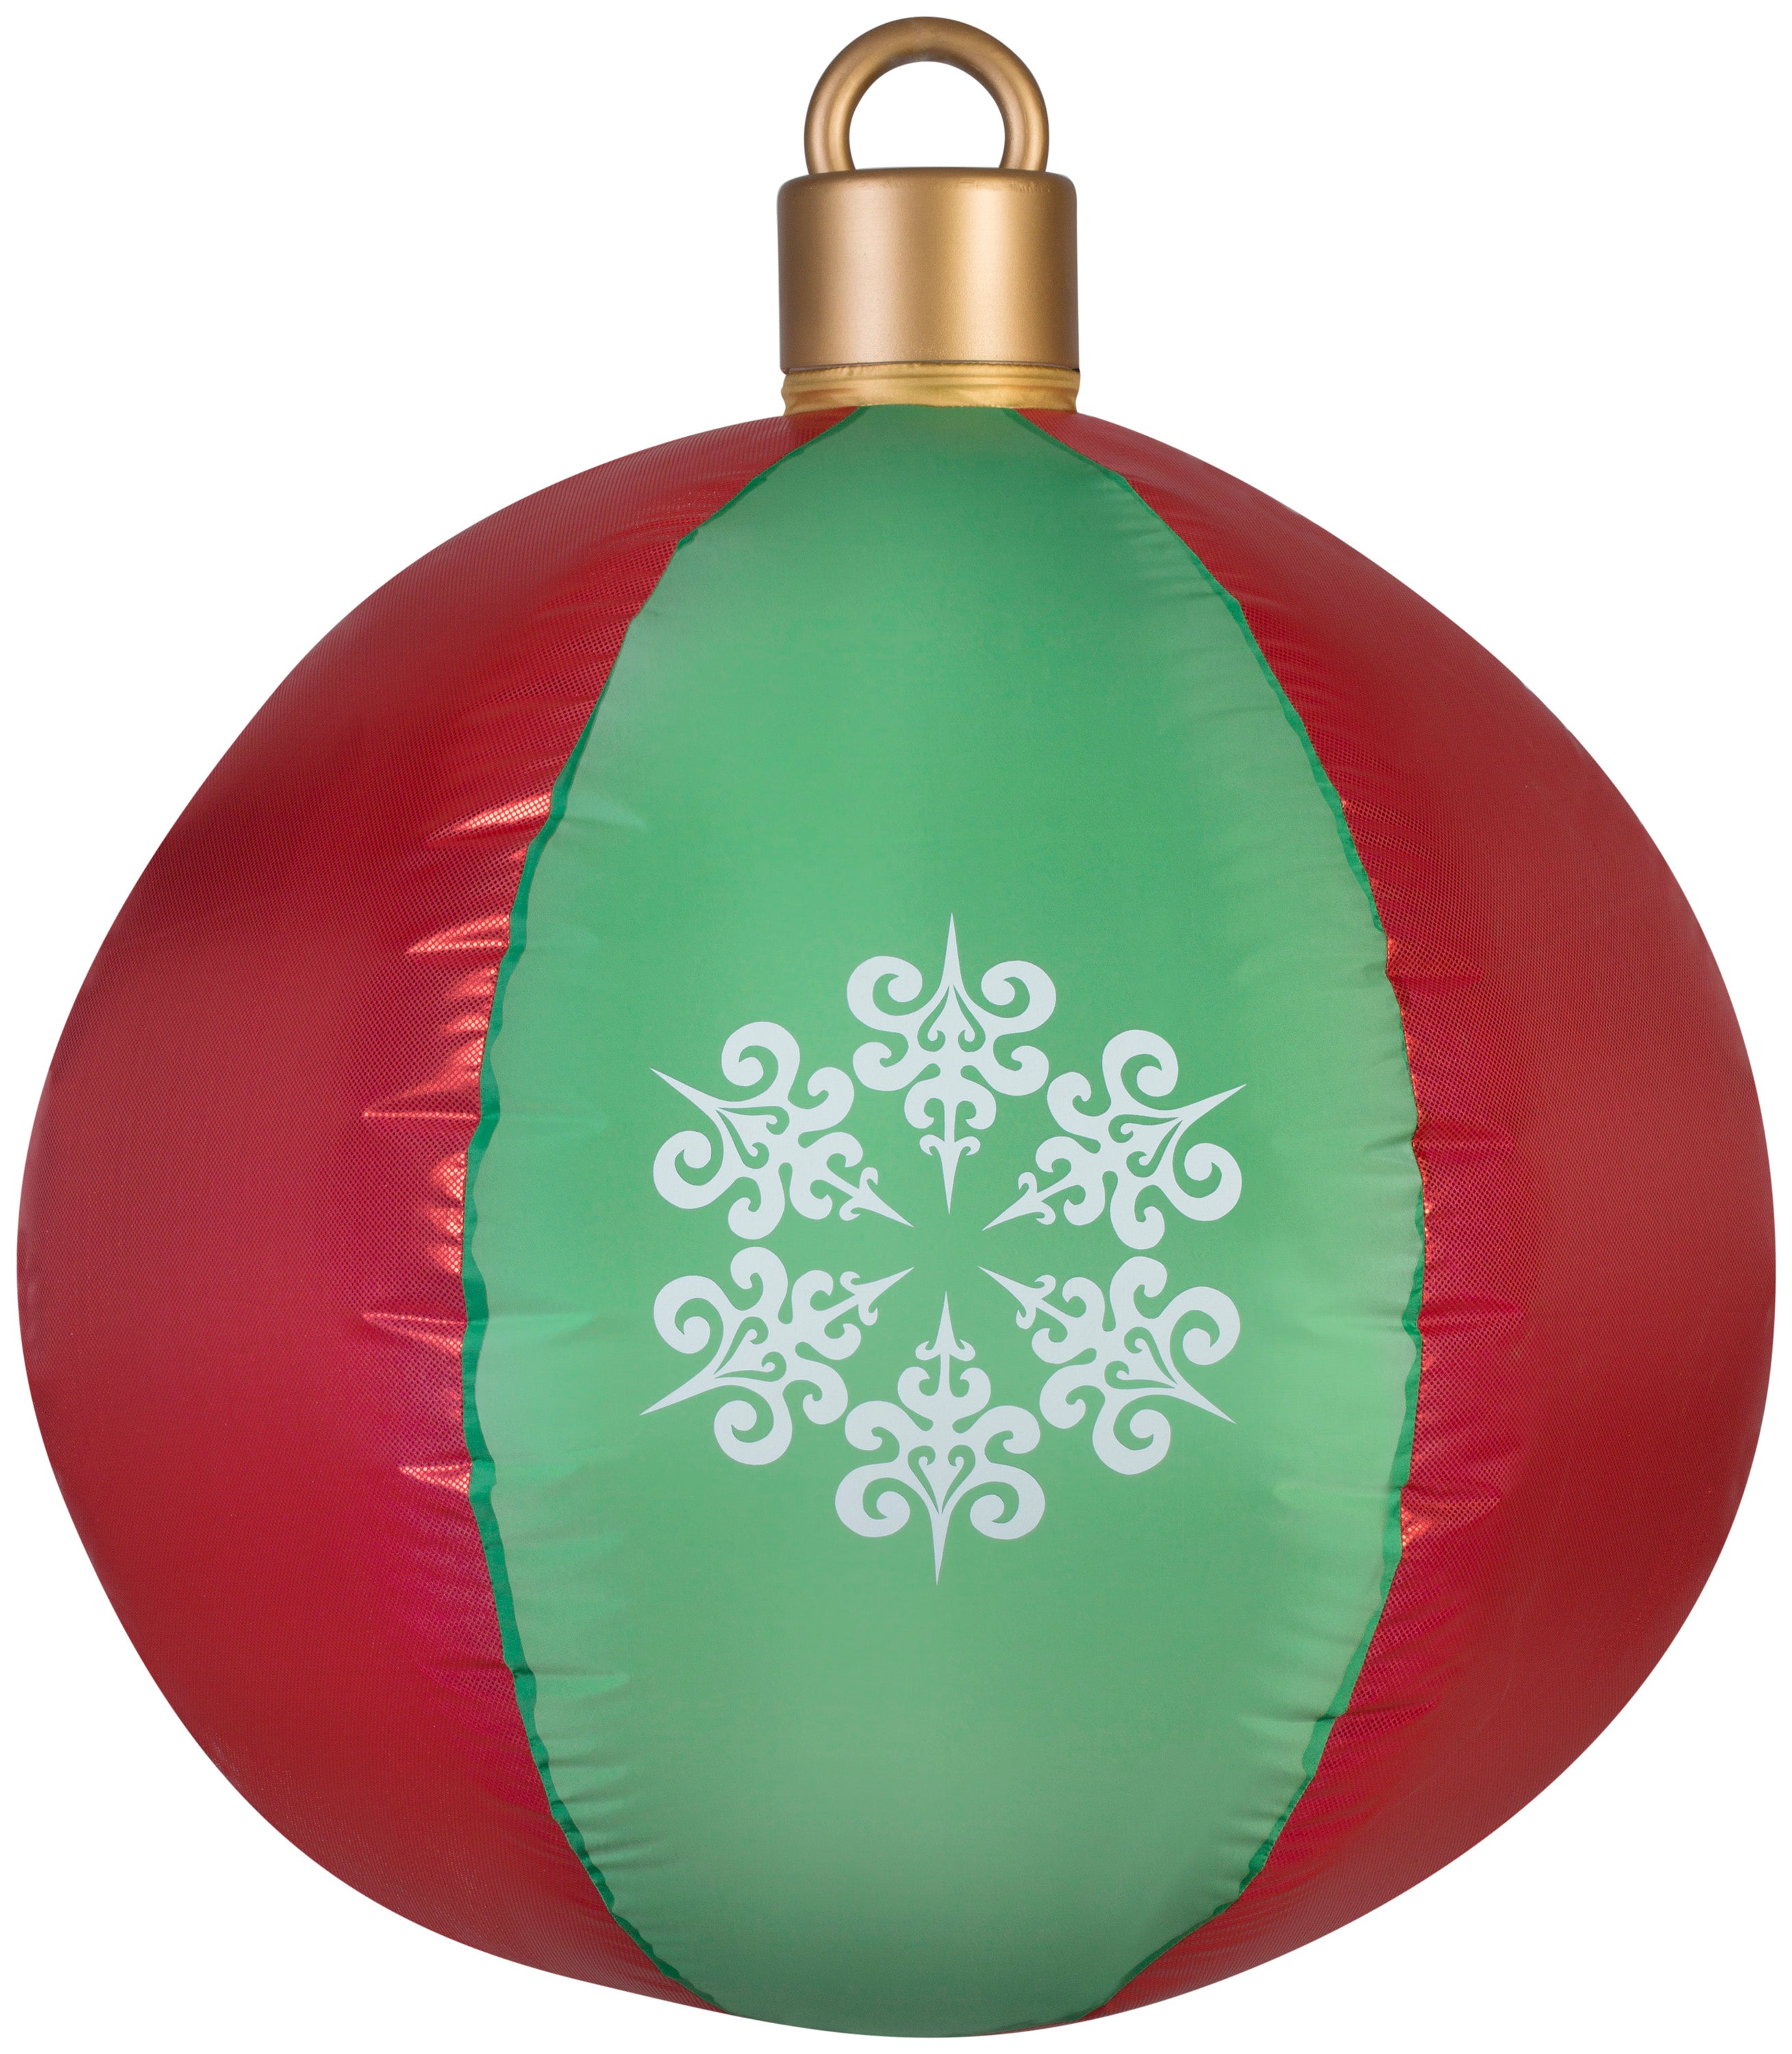 2.5' Airblown Mixed Media Hanging Ball Ornament Christmas Inflatable